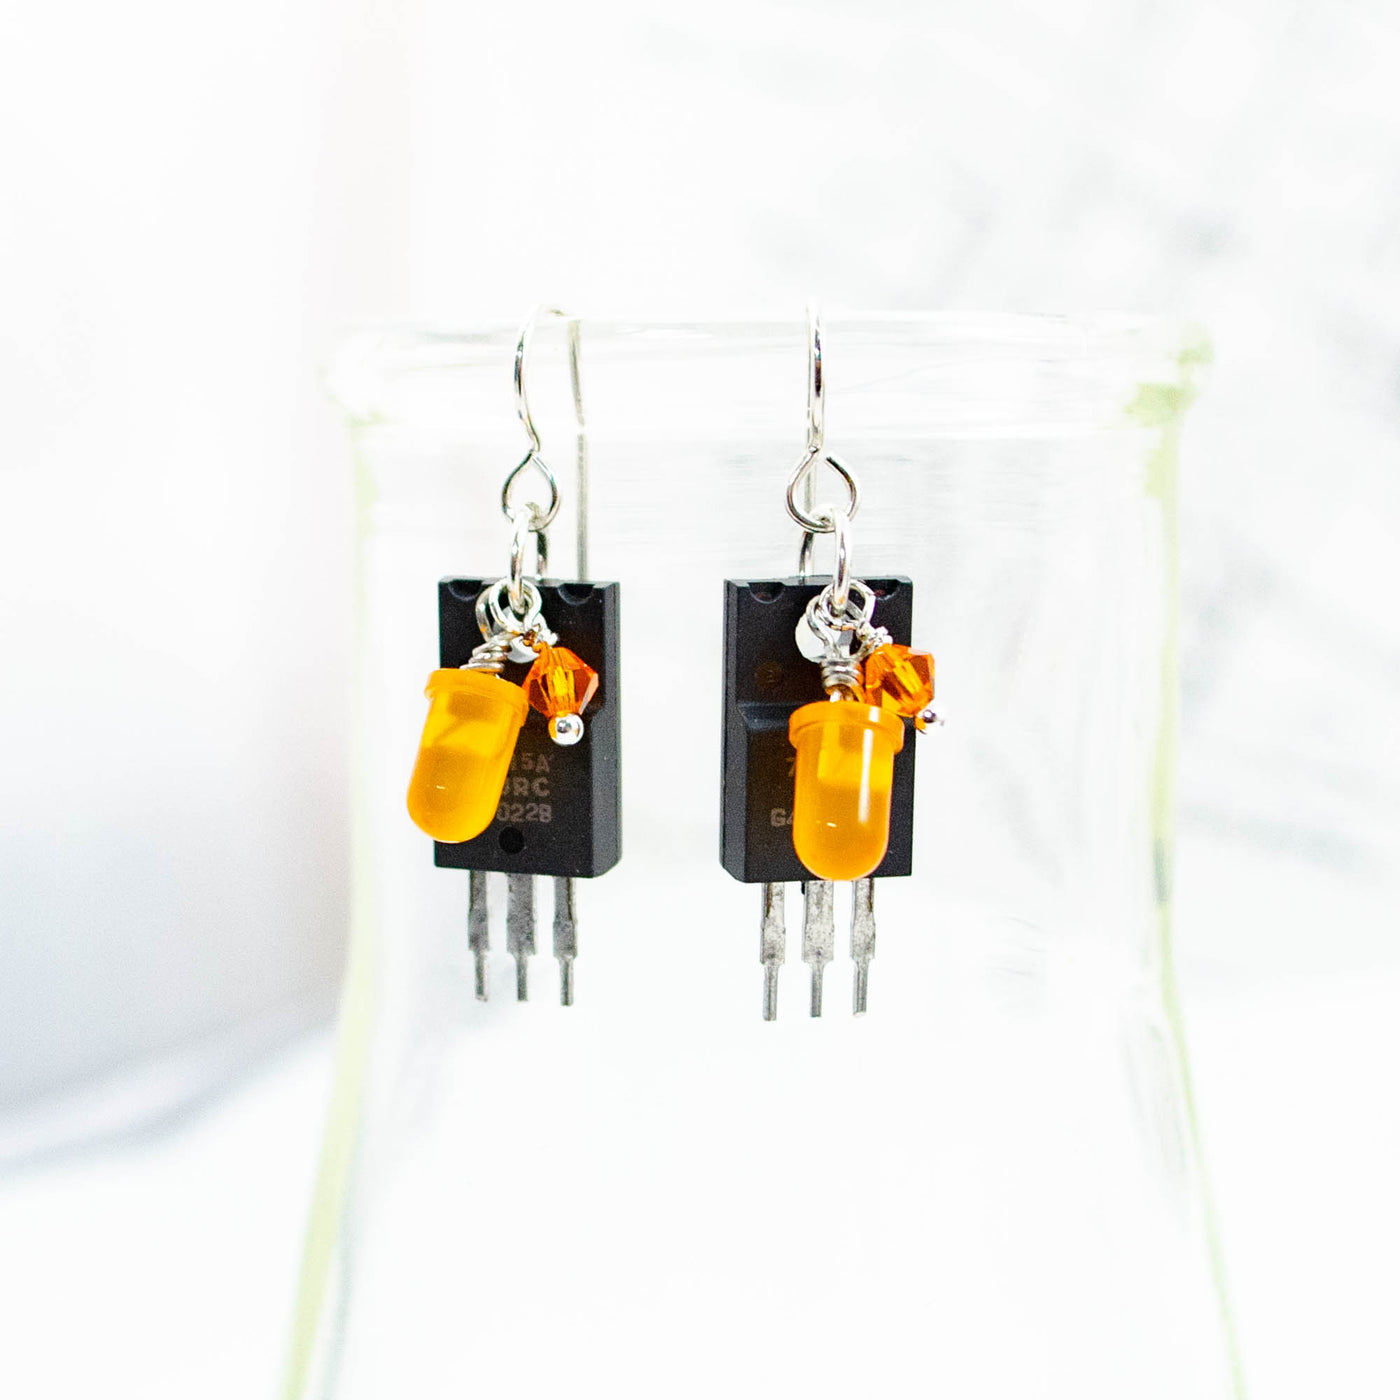 Electronic Component Earrings - Voltage Regulators and Diodes